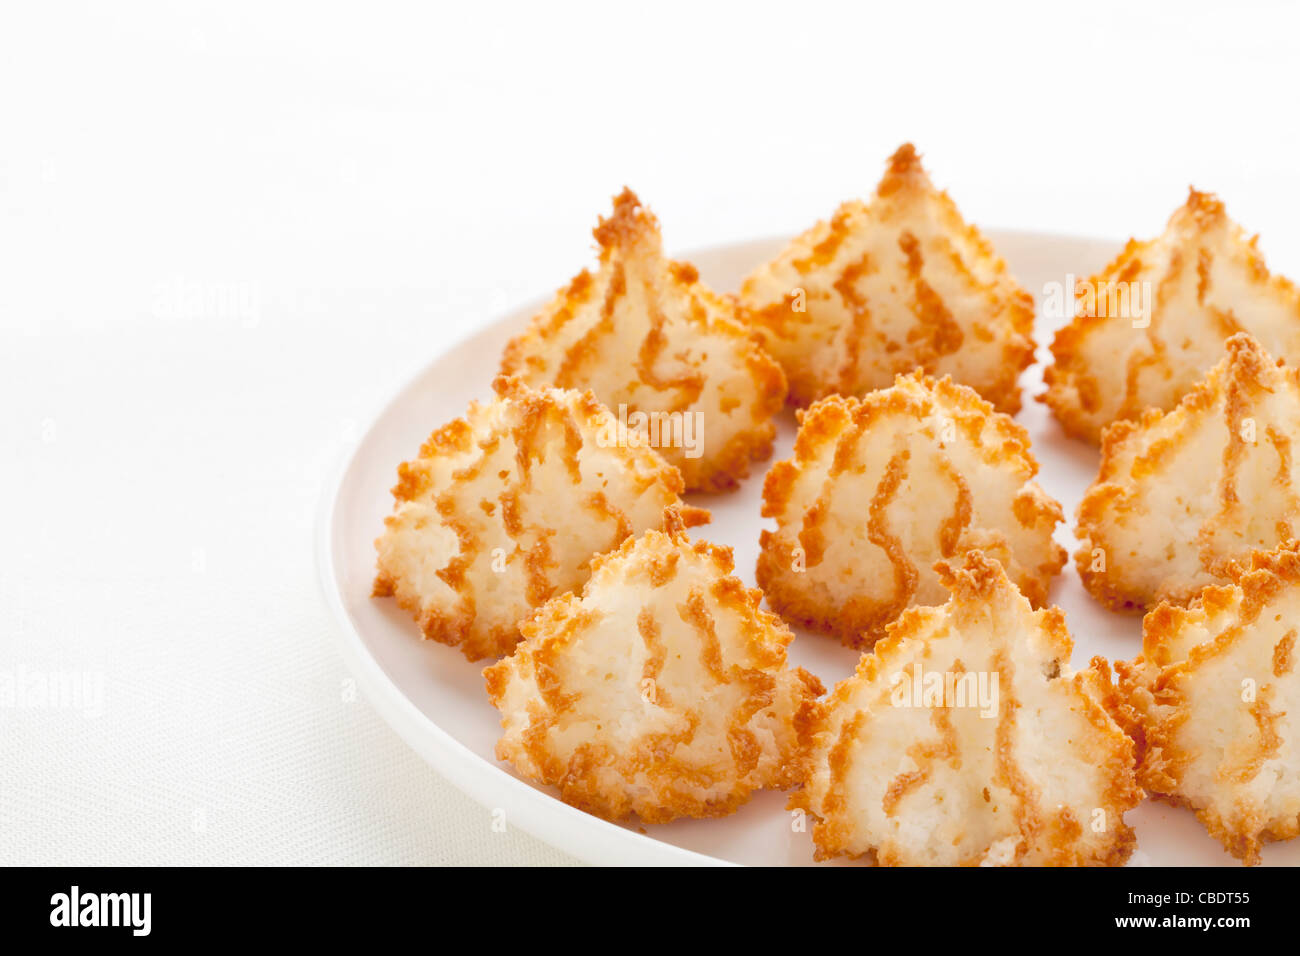 coconut macaroon cookies on white plate against tablecloth Stock Photo